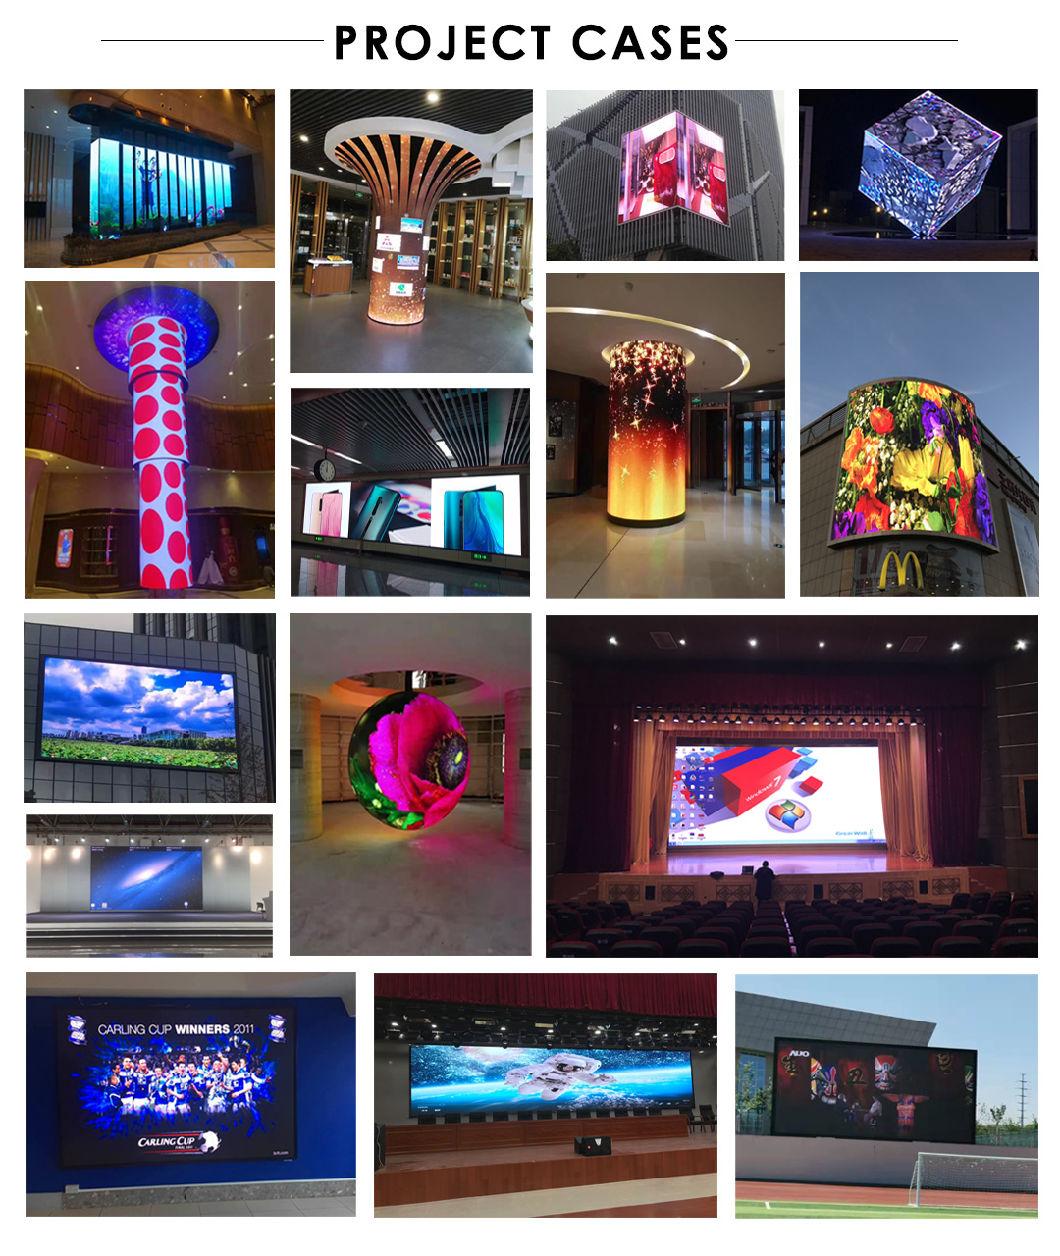 Indoor P3.91-7.81 Transparent LED Display Screen Full Color LED Video Wall